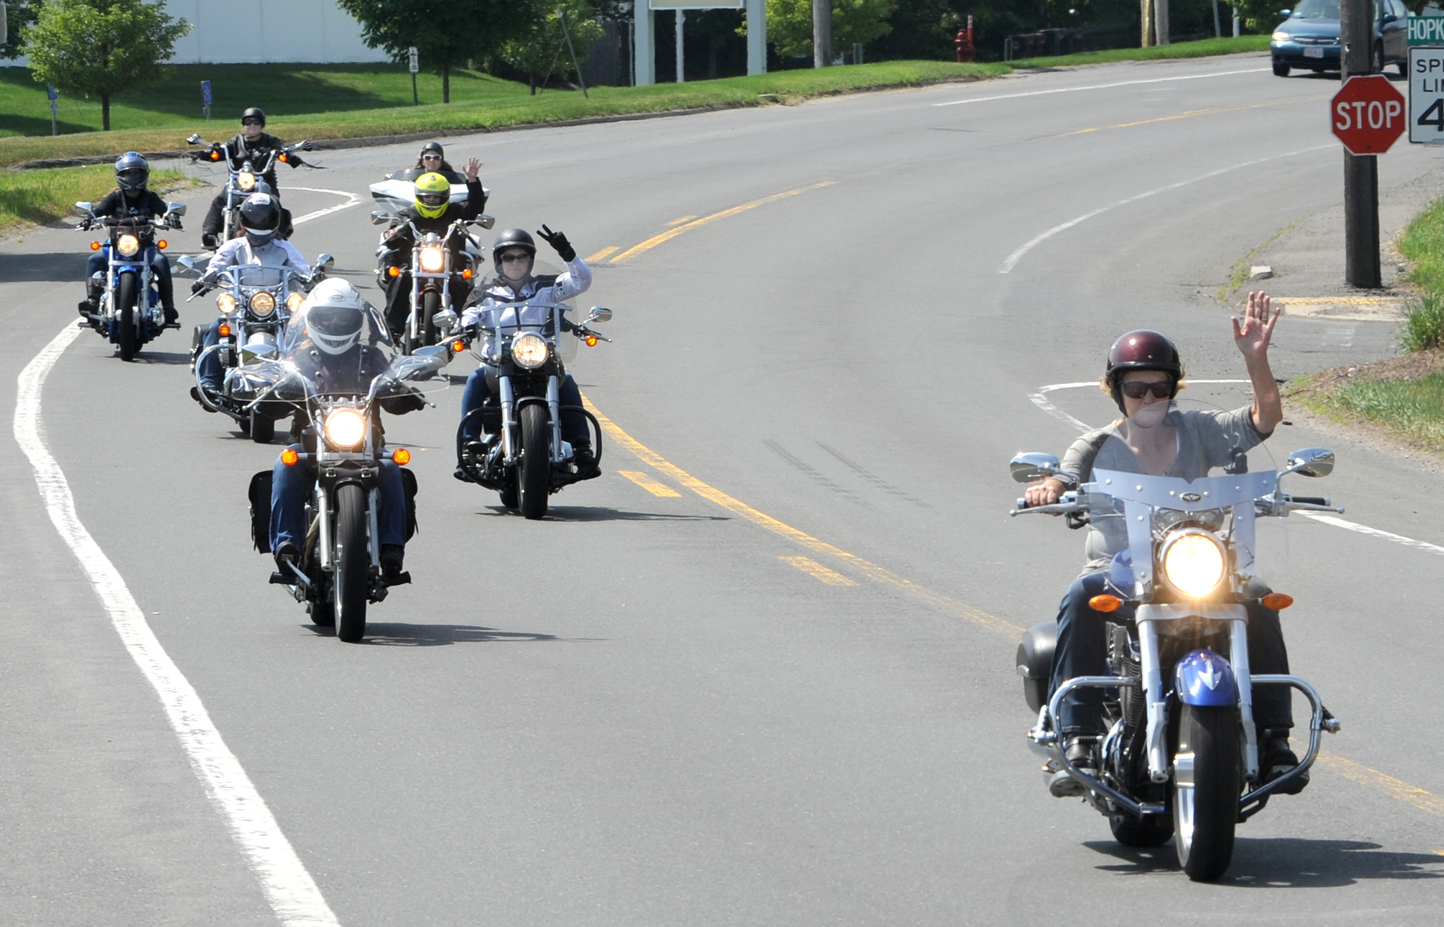 Women’s motorcycle group expands to Massachusetts | The Westfield News